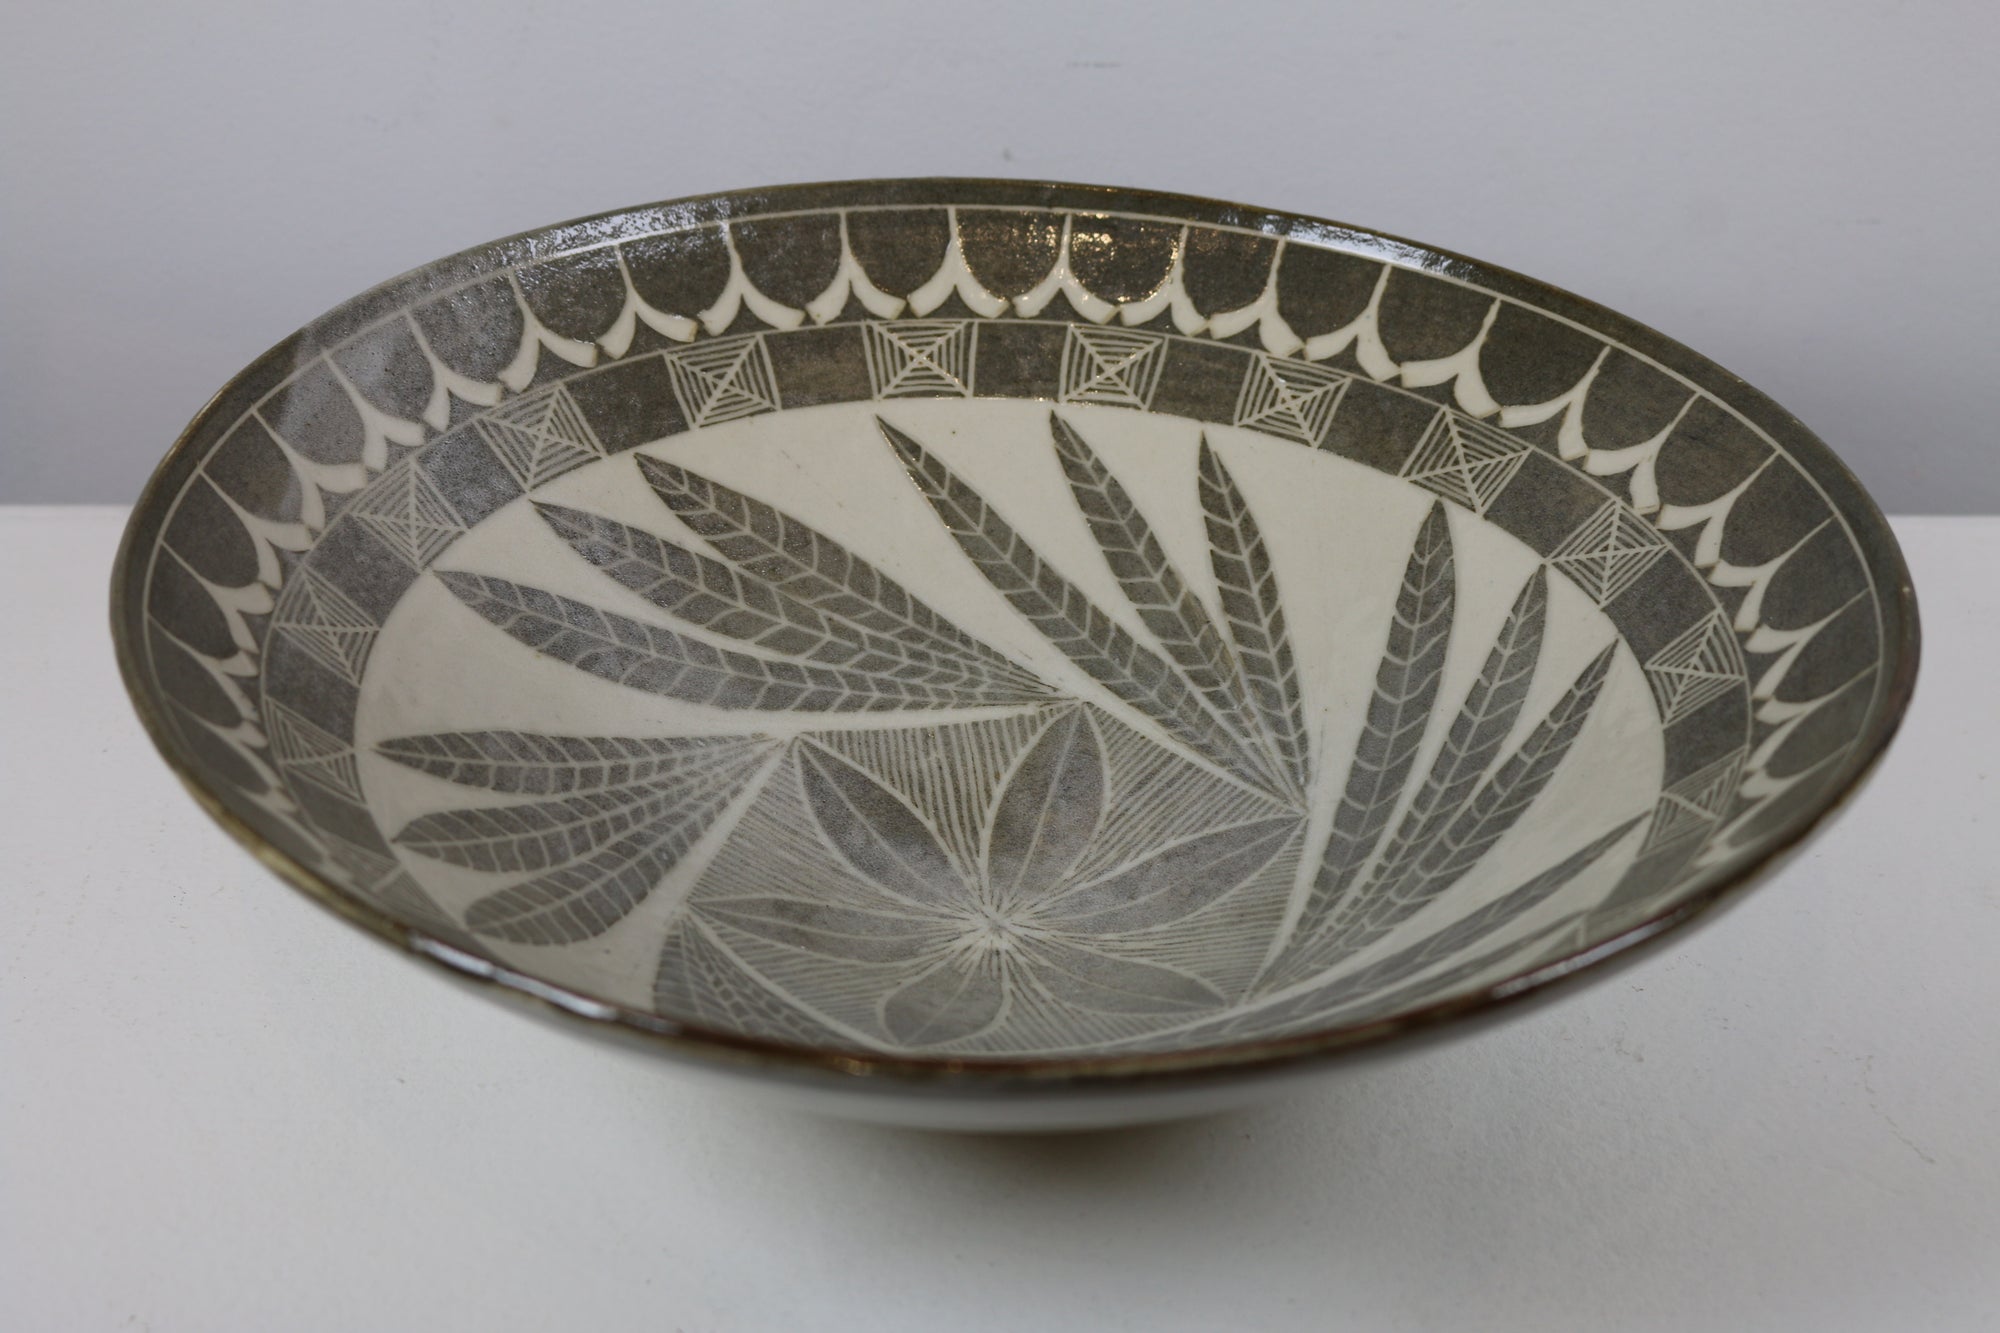 Wide Ceramic Bowl with Decorative Leaves